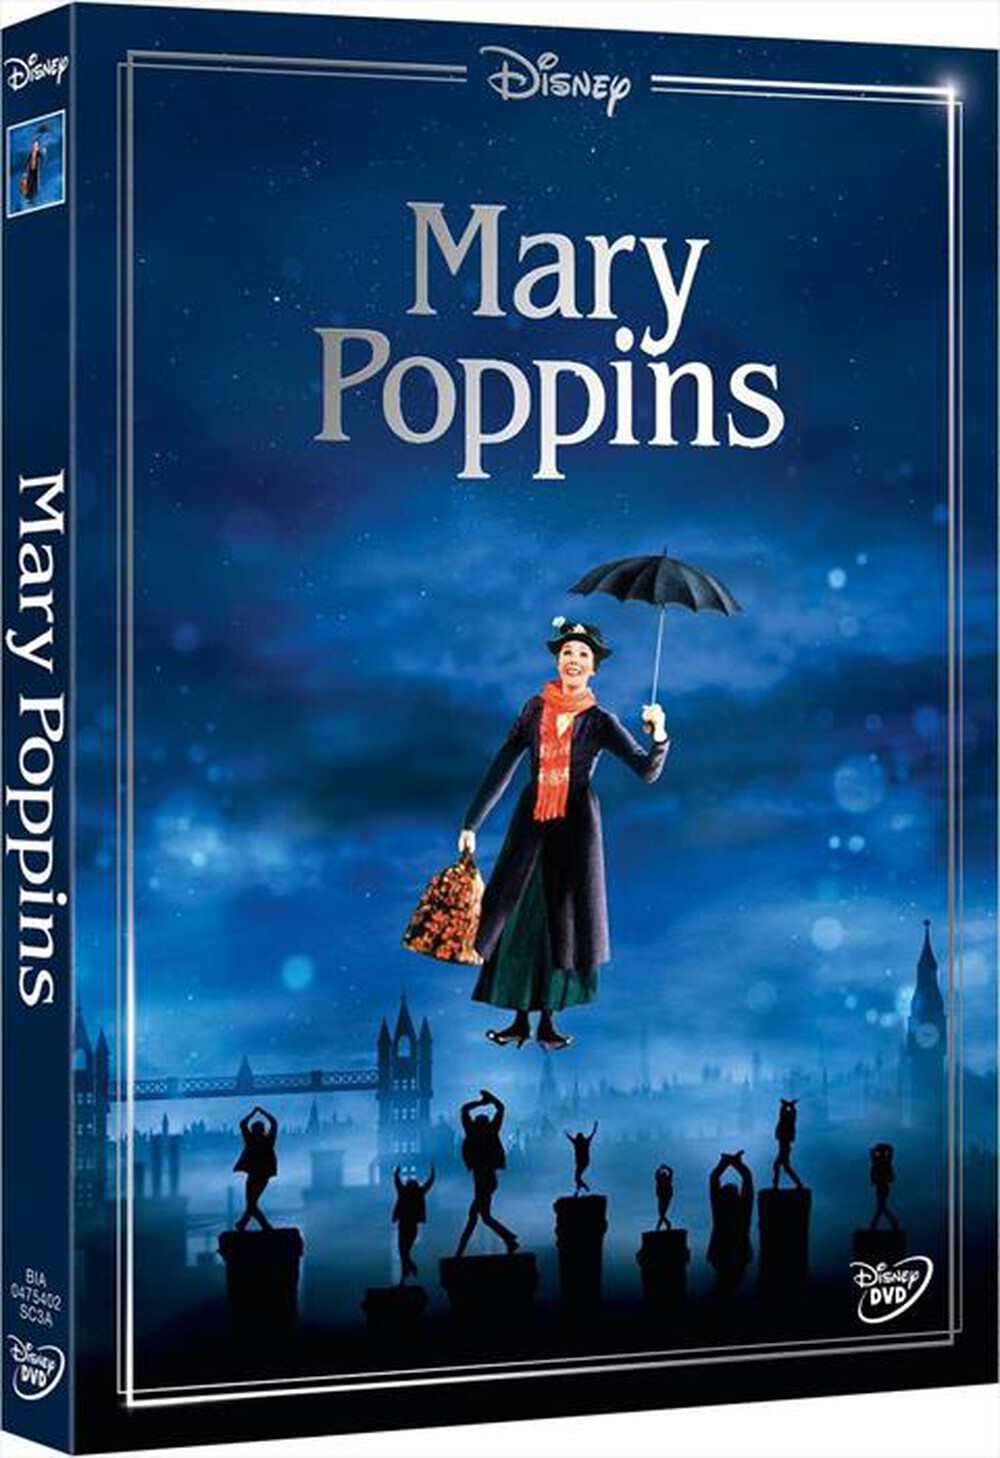 "EAGLE PICTURES - Mary Poppins (New Edition)"